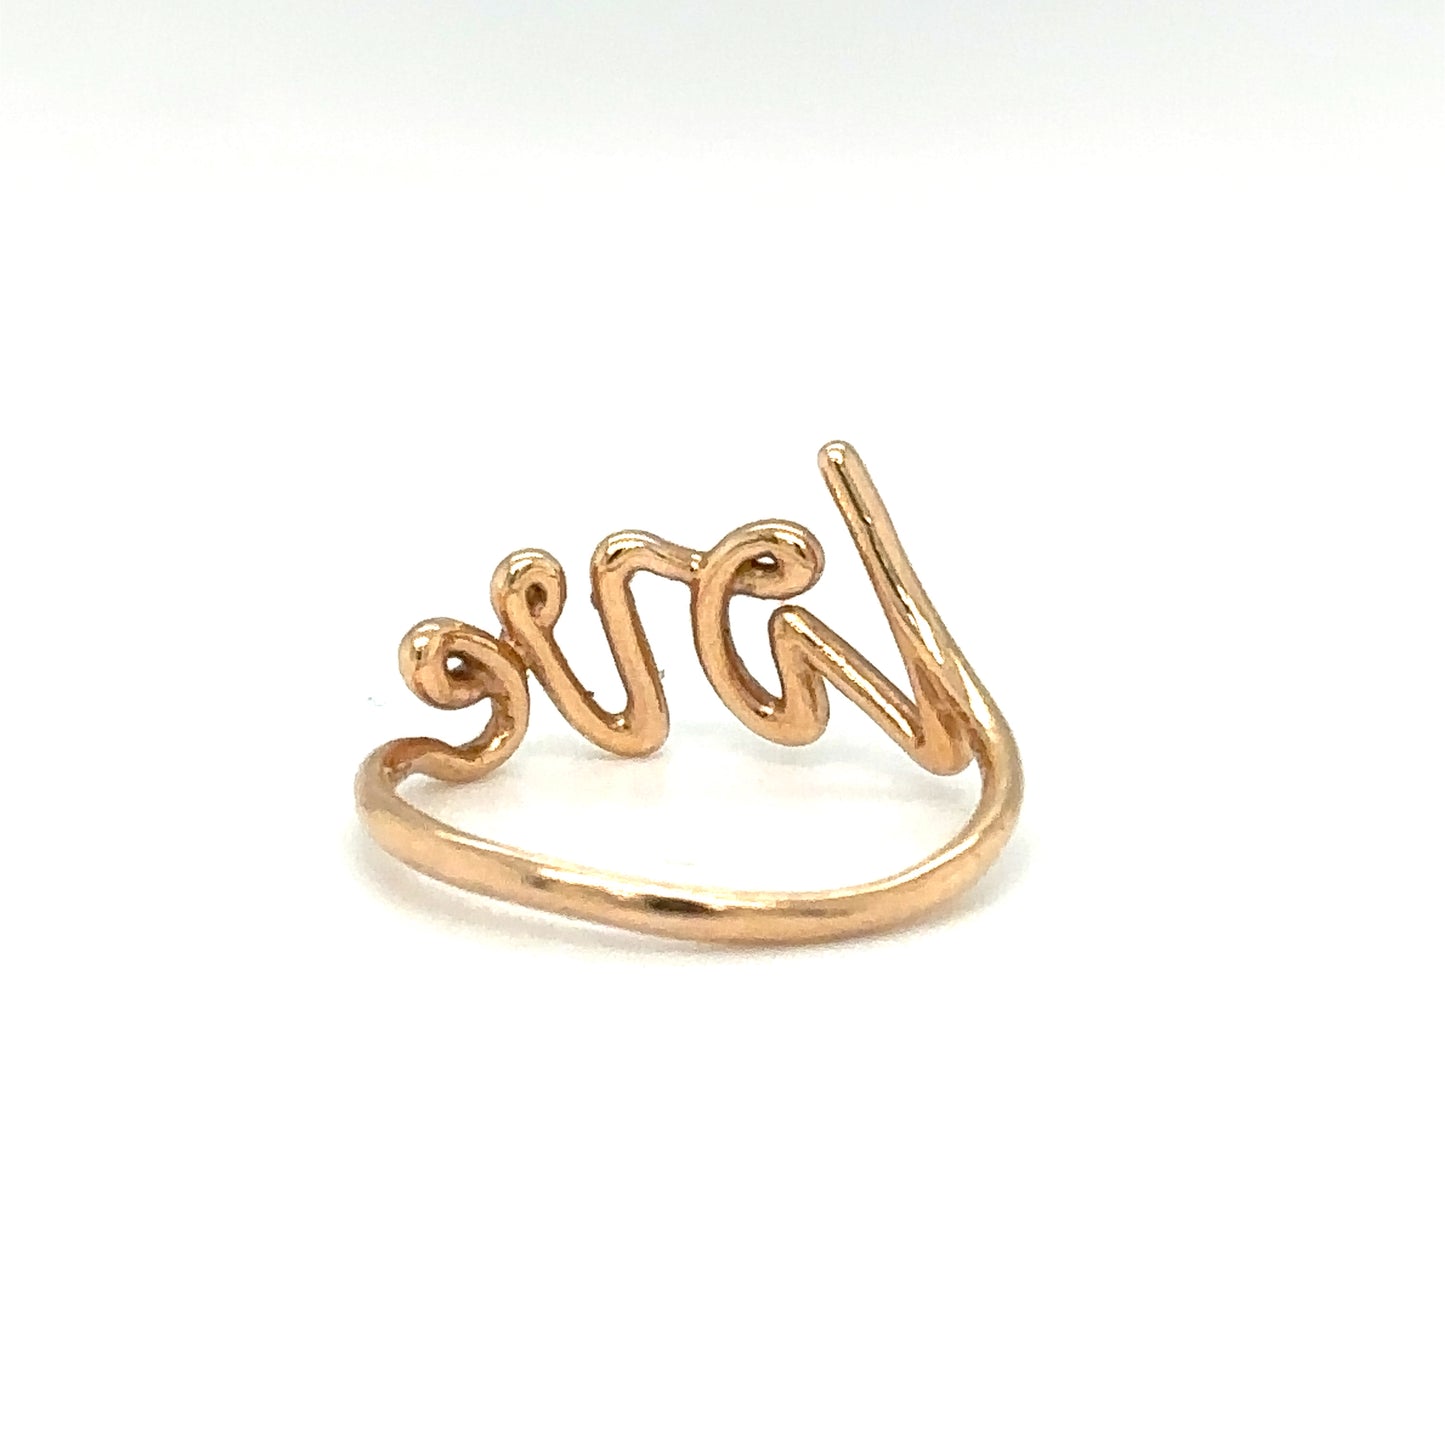 Tiffany & Co. Paloma Picasso "Love" Ring in 18K Rose Gold